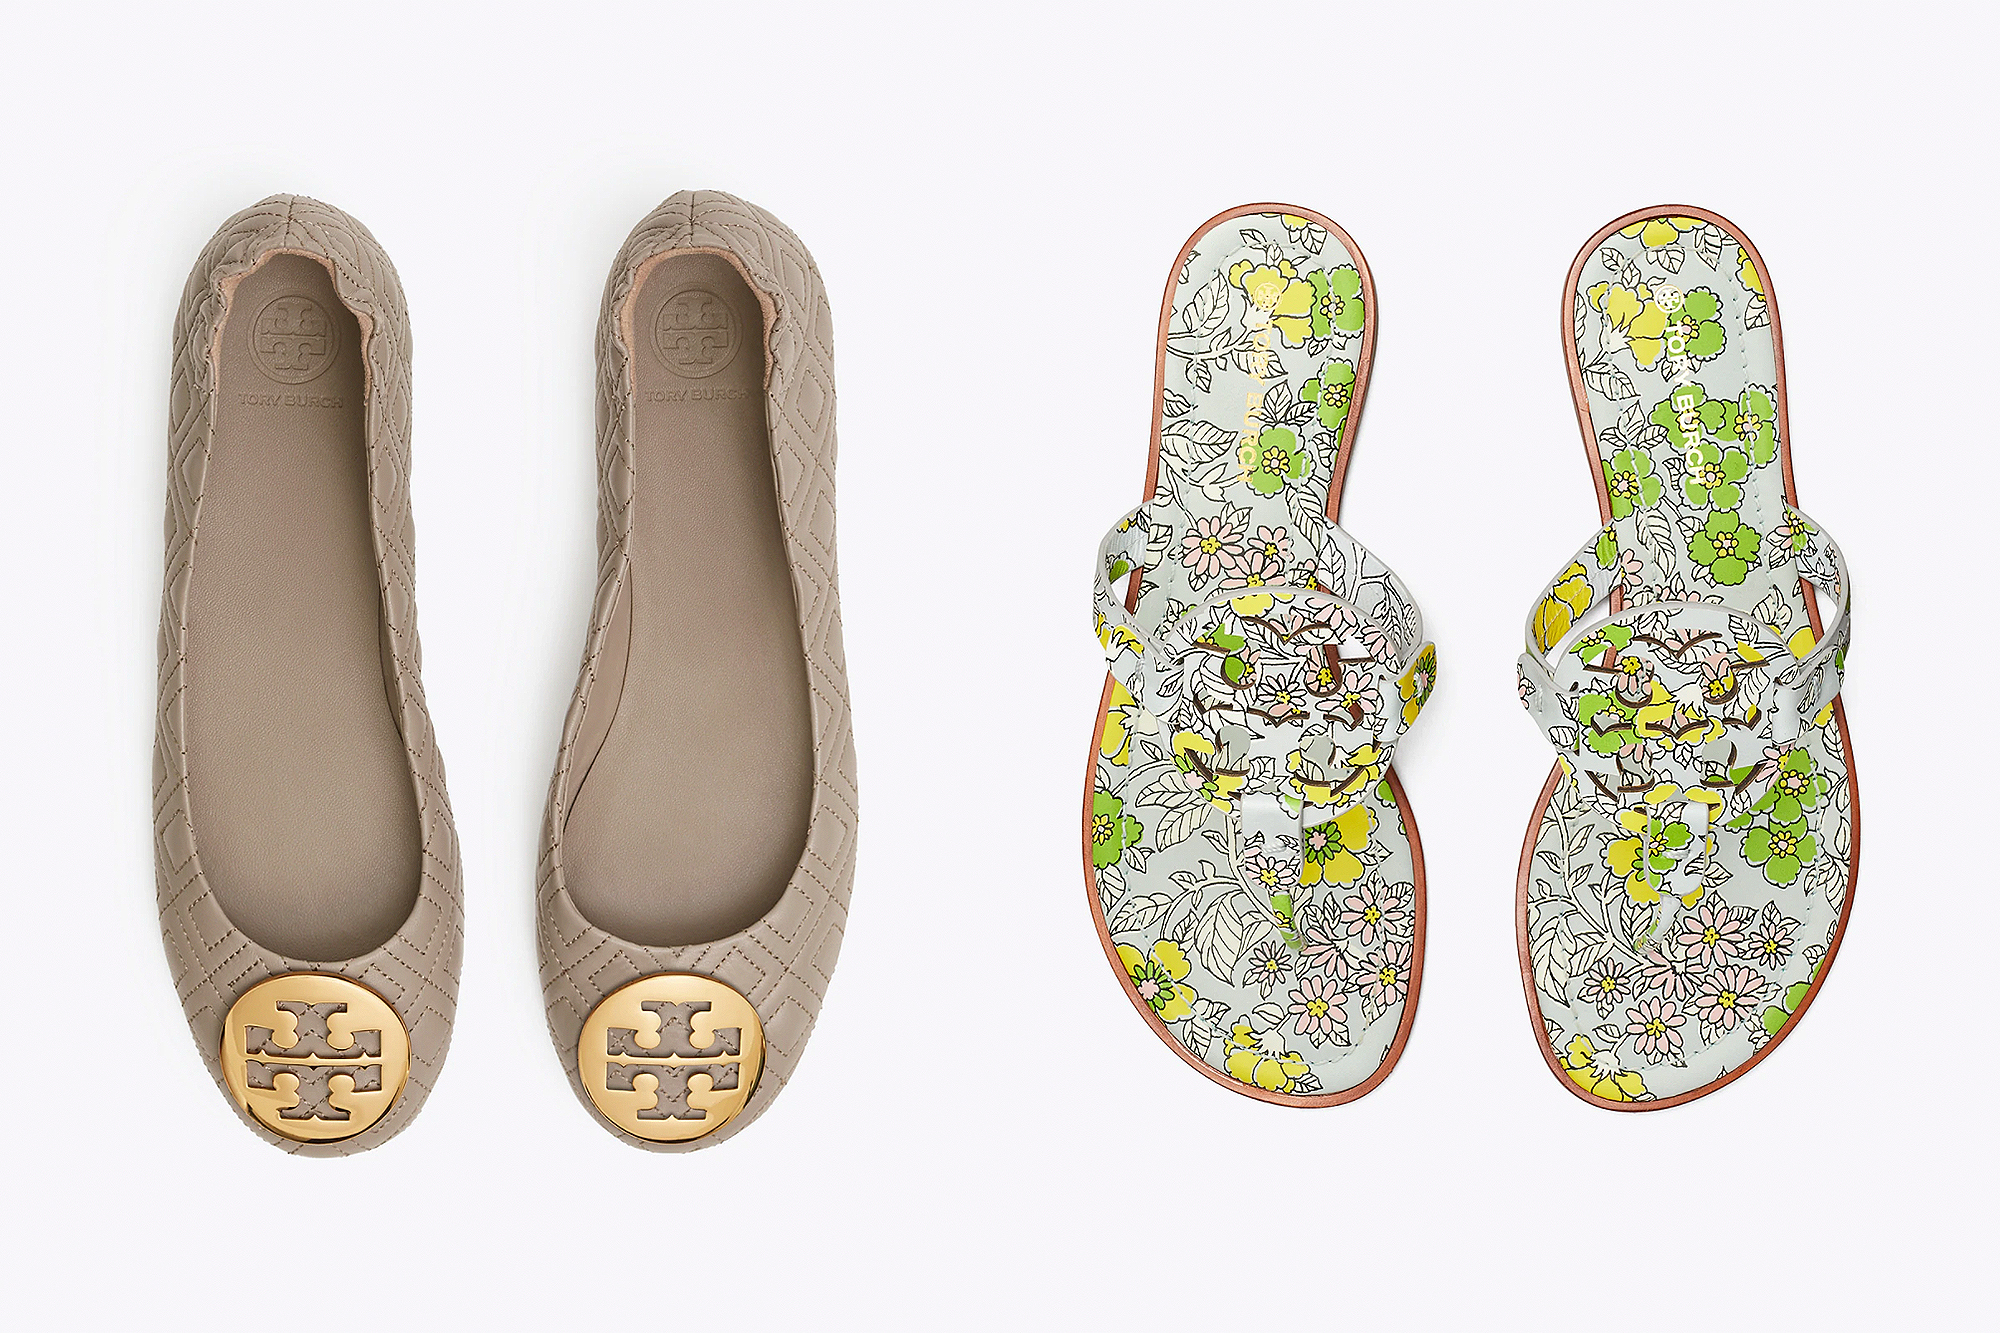 Tory Burch shoes: Get the brand's best-selling flats on sale